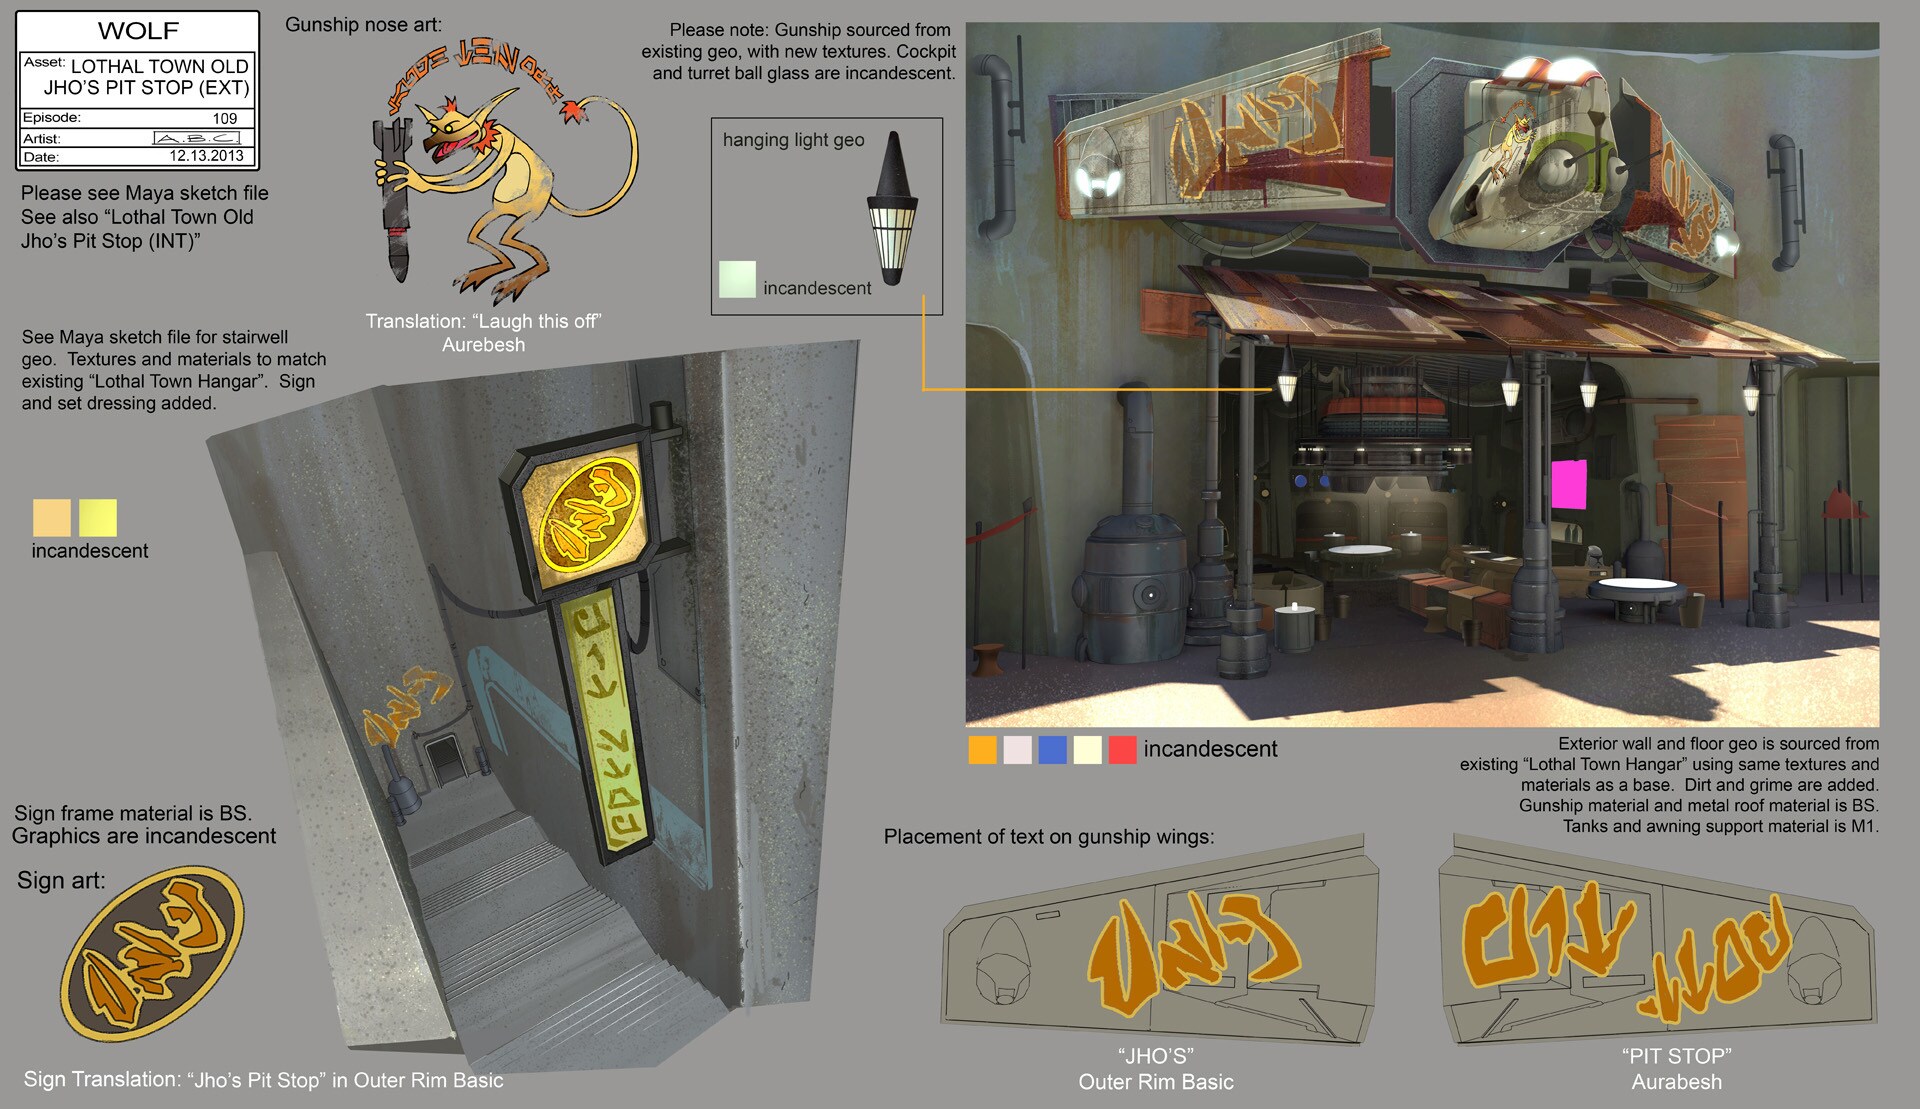 Old Jho's Pit Stop exterior illustration, with decorative details, by Amy Beth Christenson